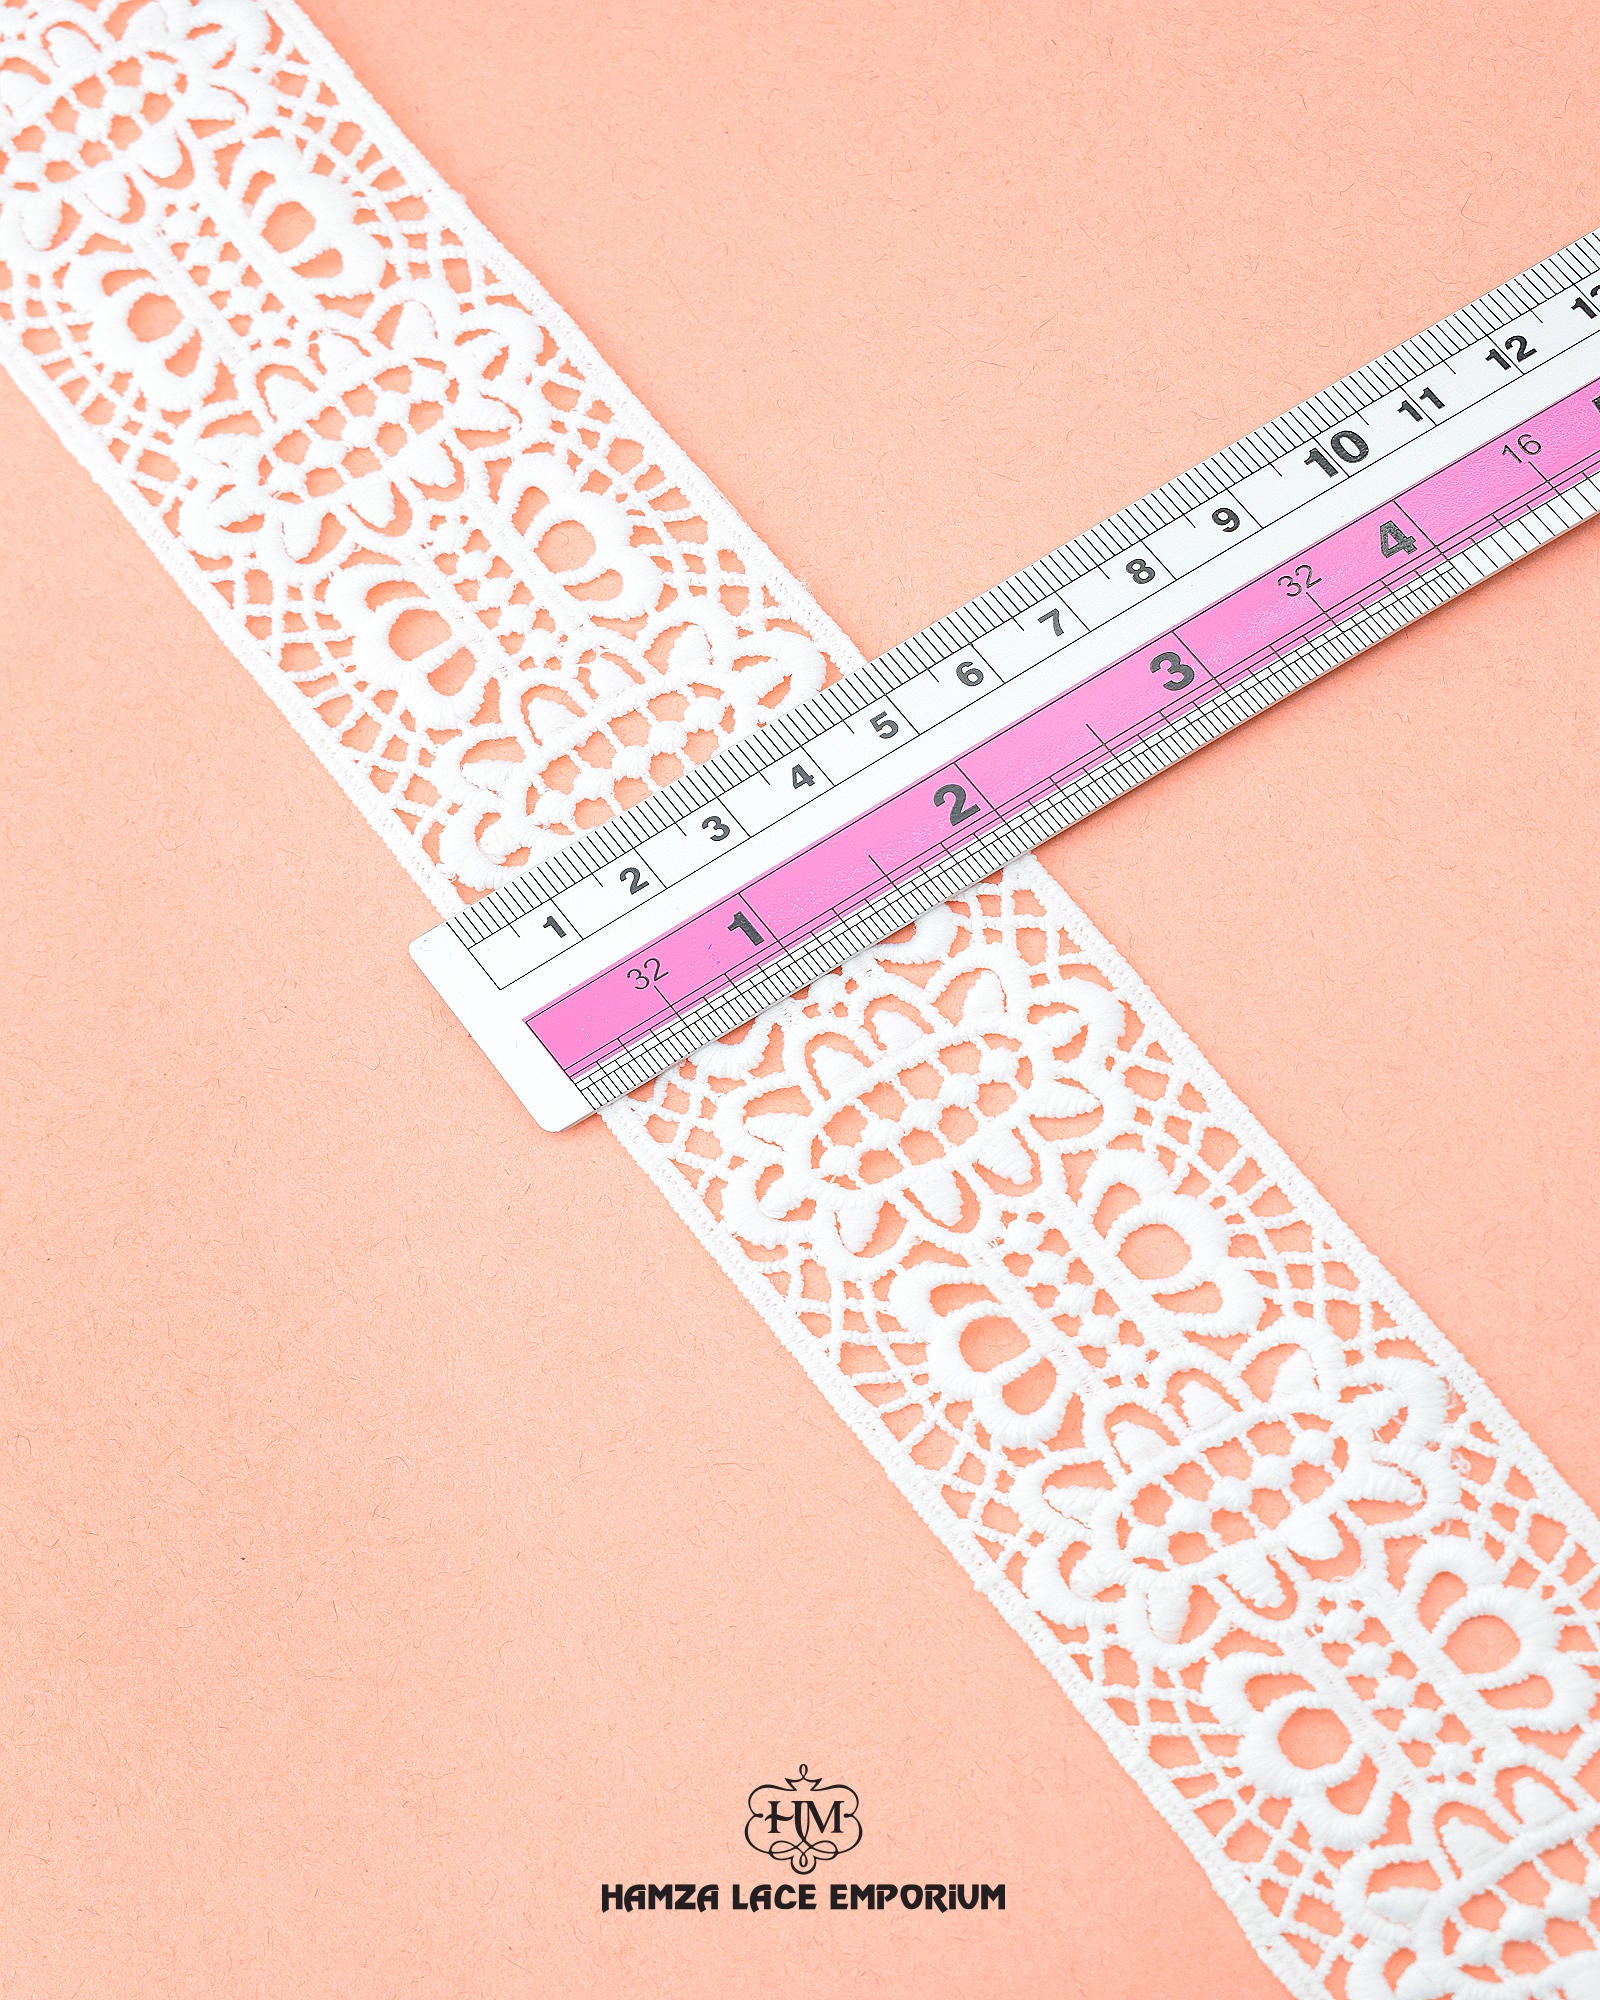 The size of the 'Center Filling Lace 23577' is given with the help of a ruler.